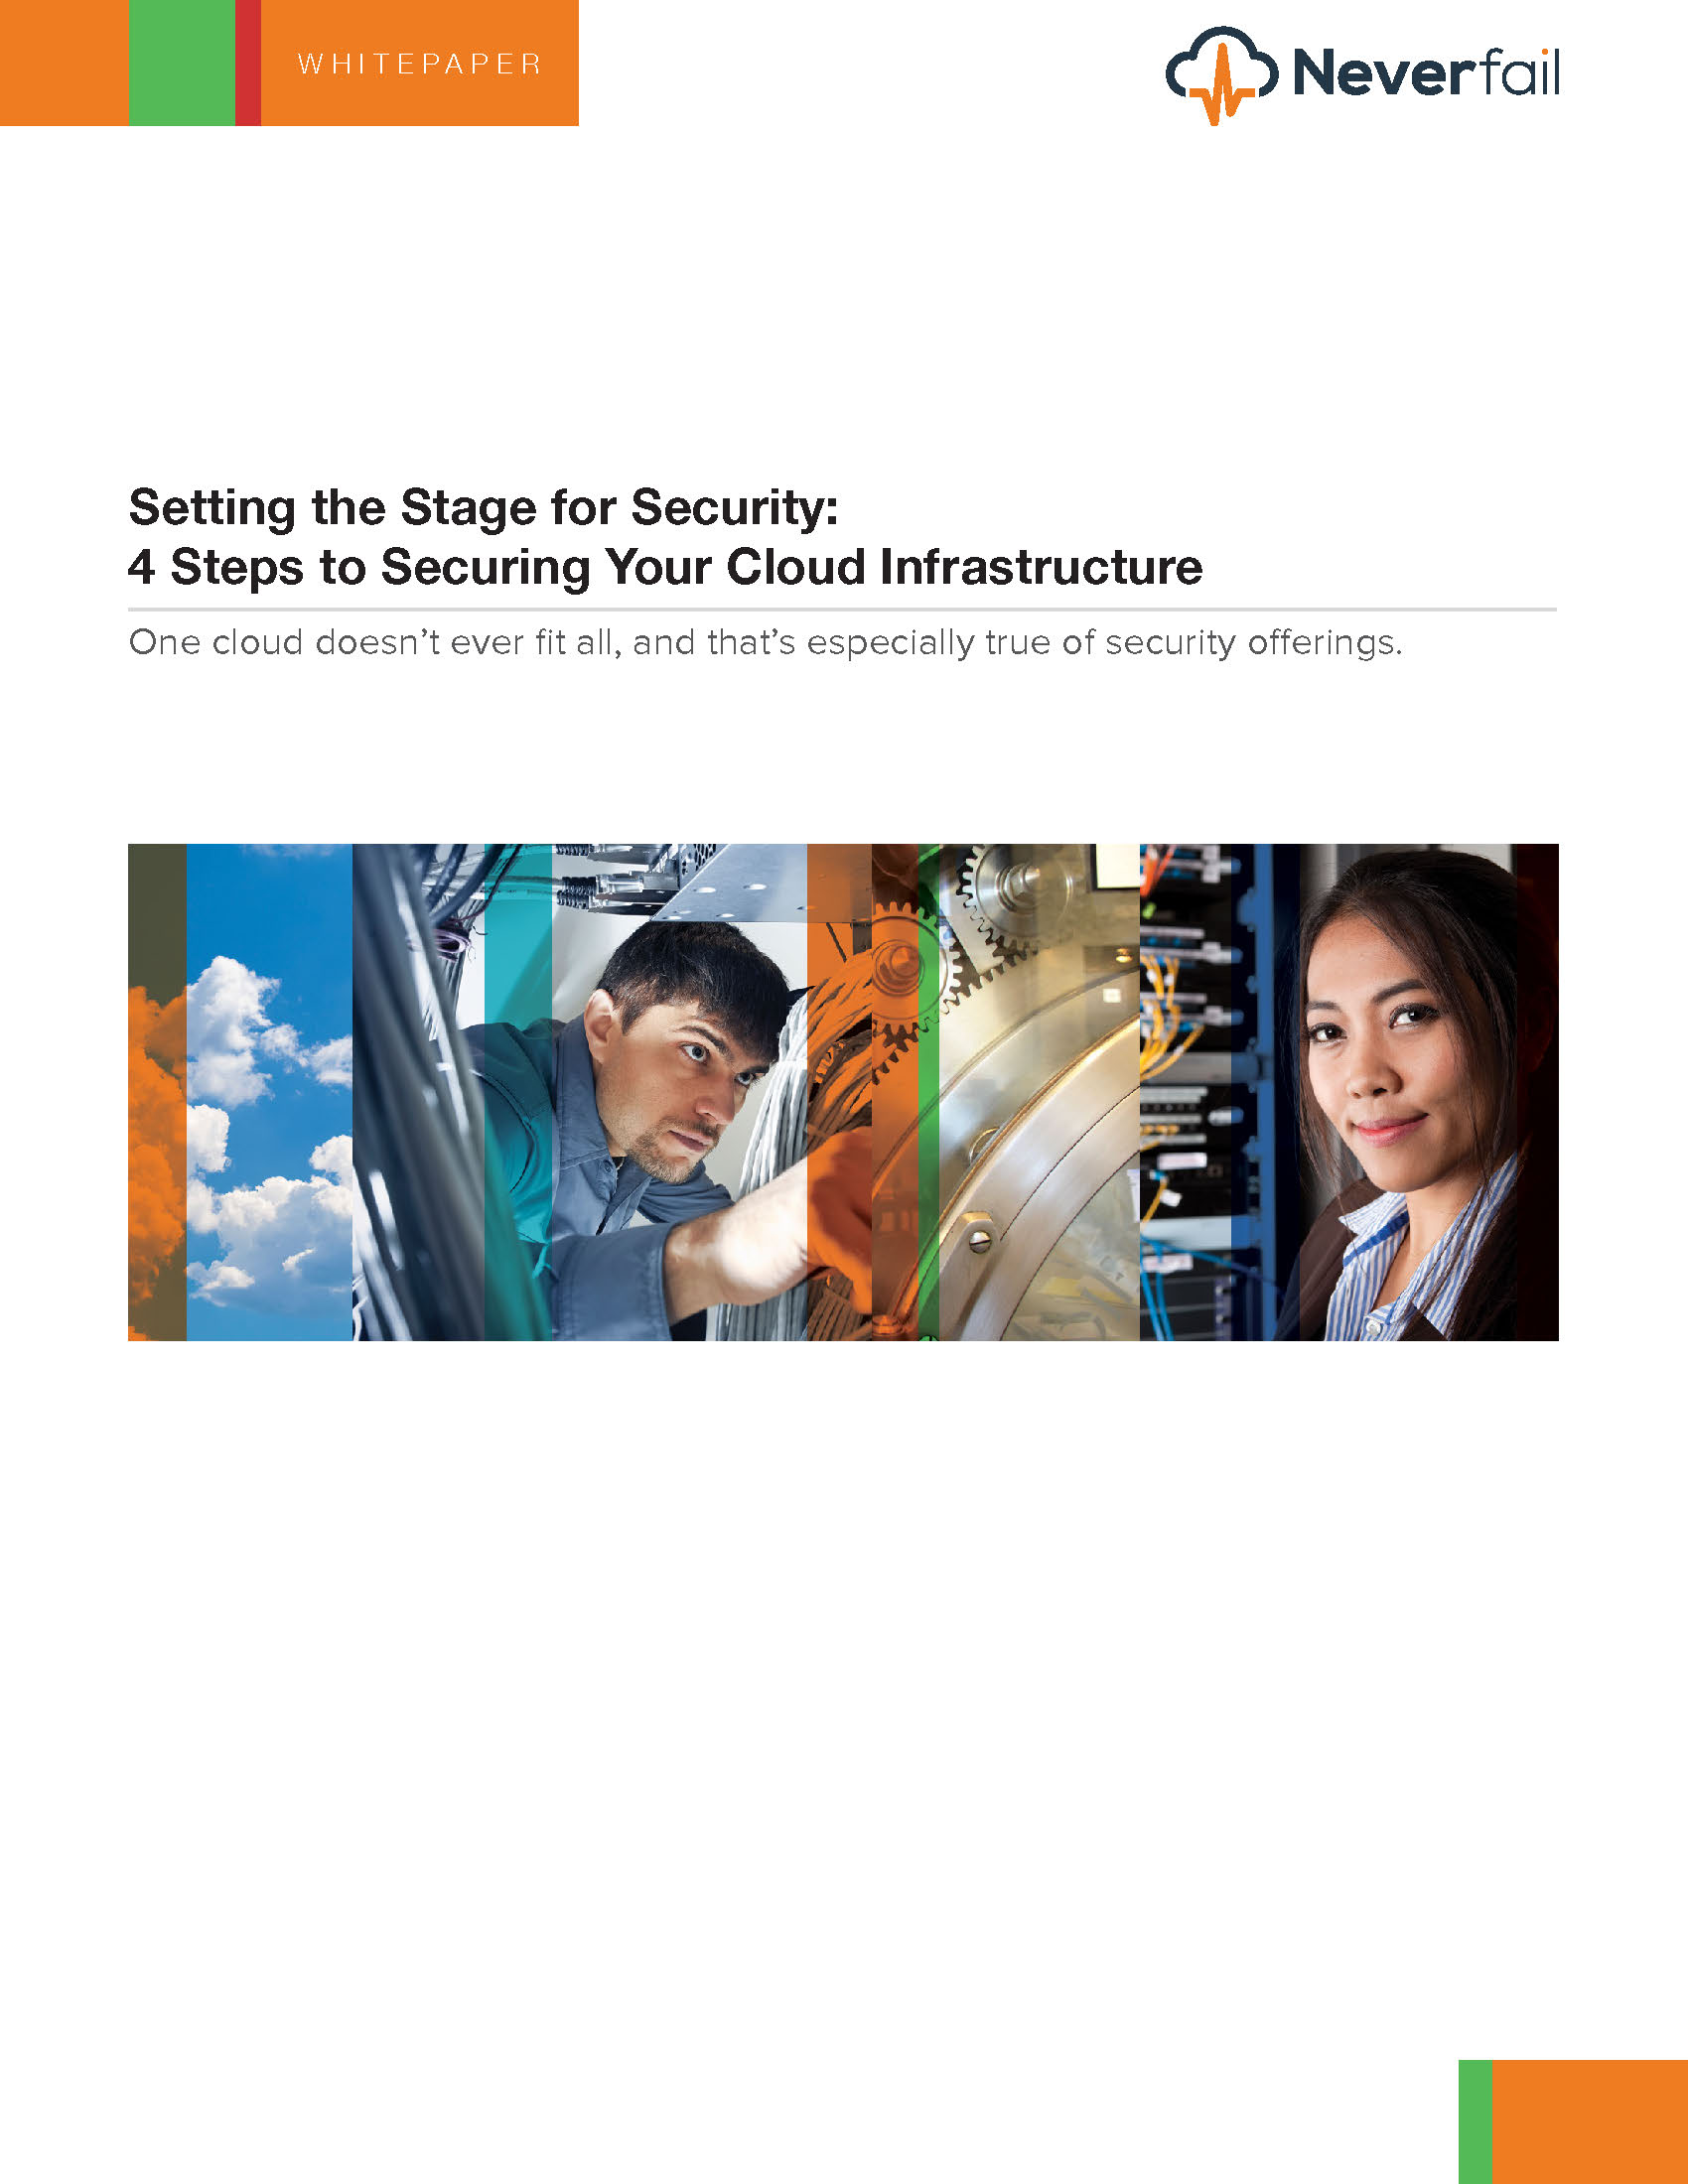 White paper how to secure private or public cloud infrastructure